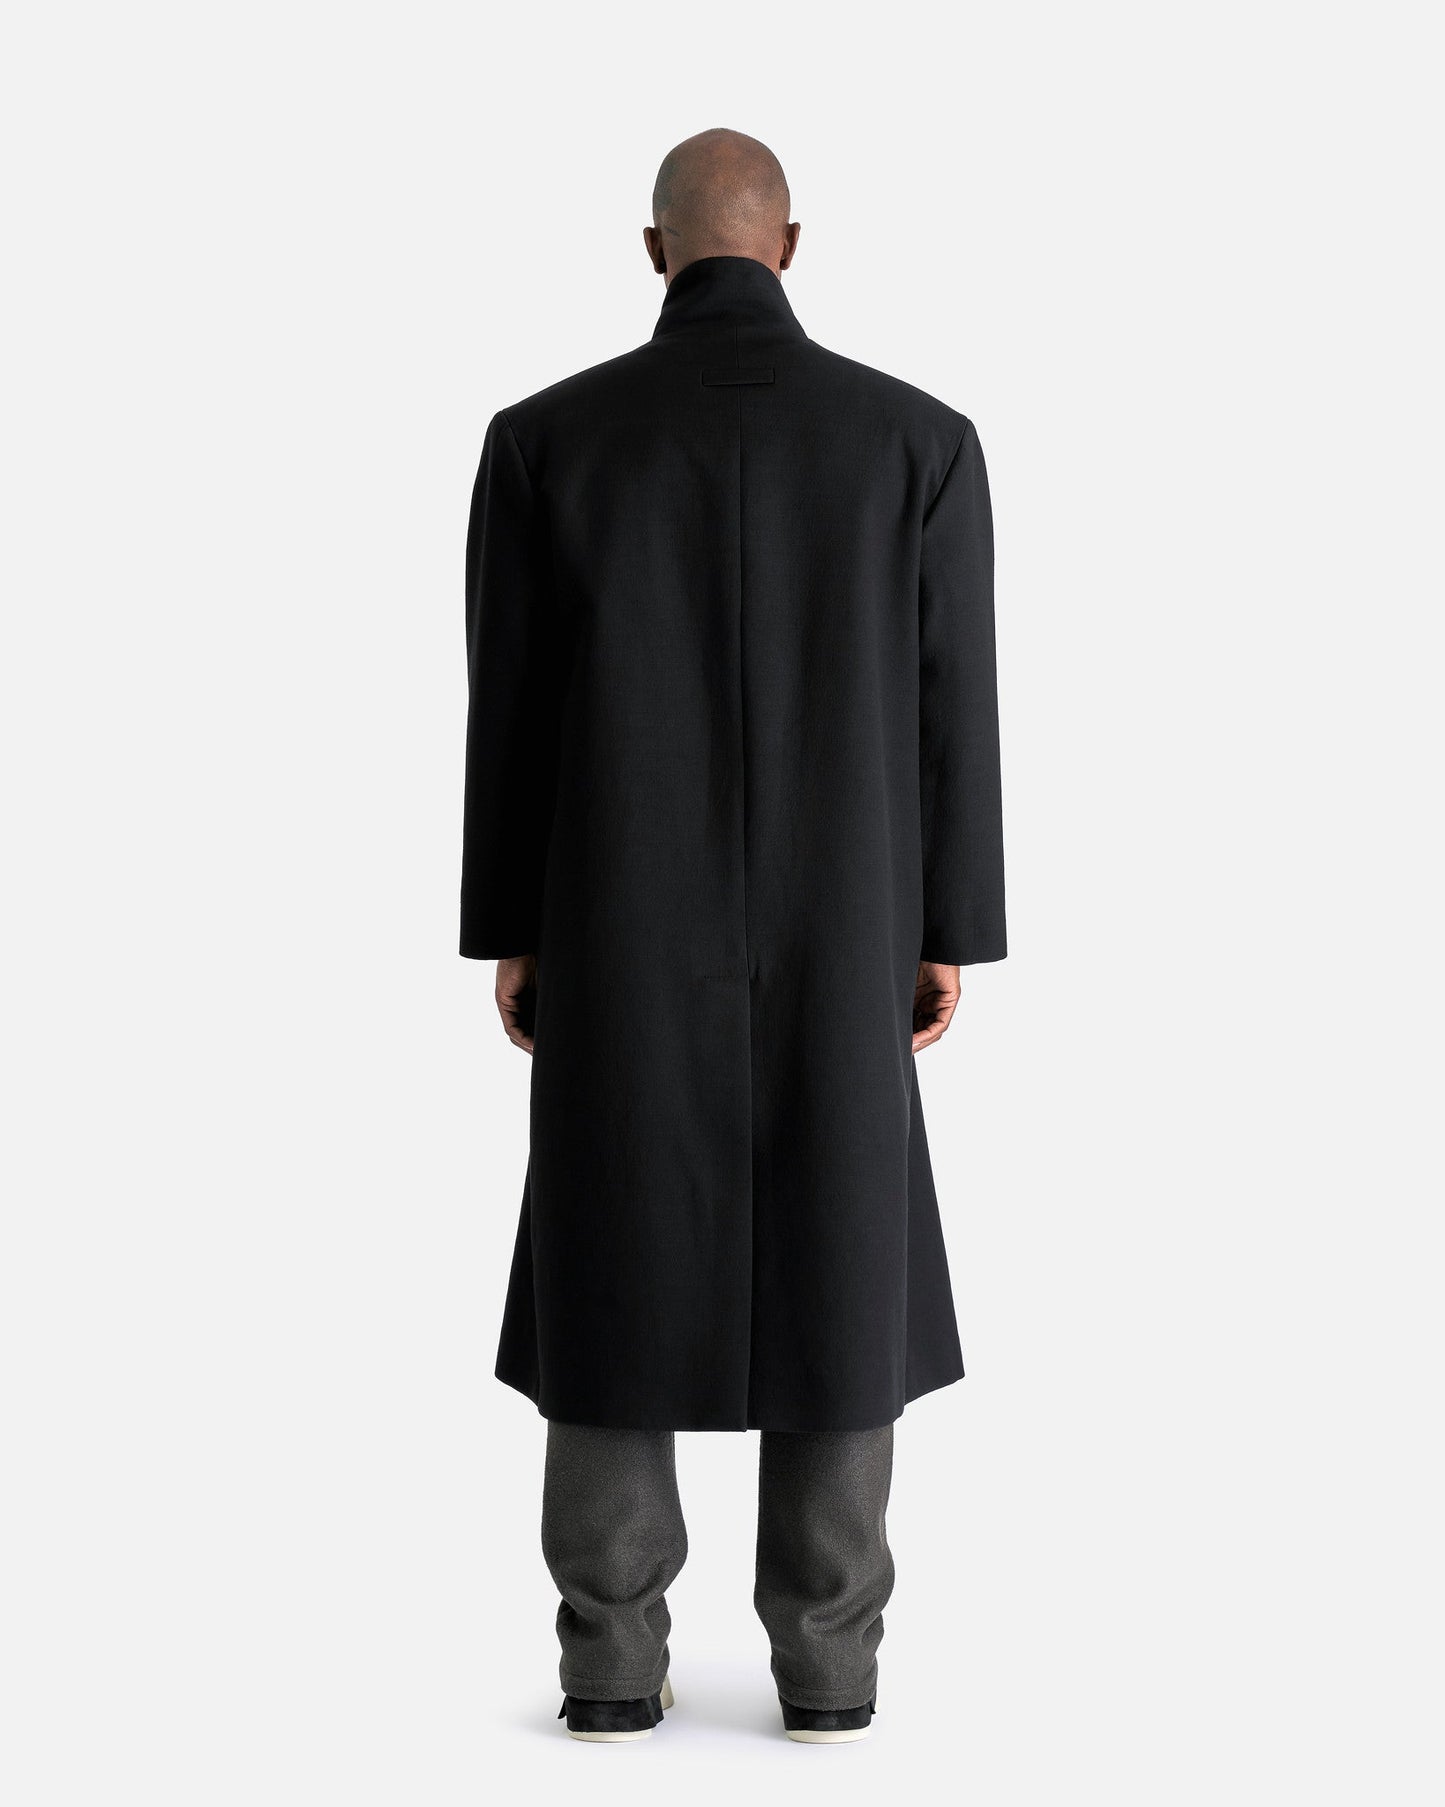 Fear of God Men's Coat Stand Collar Relaxed Overcoat in Black